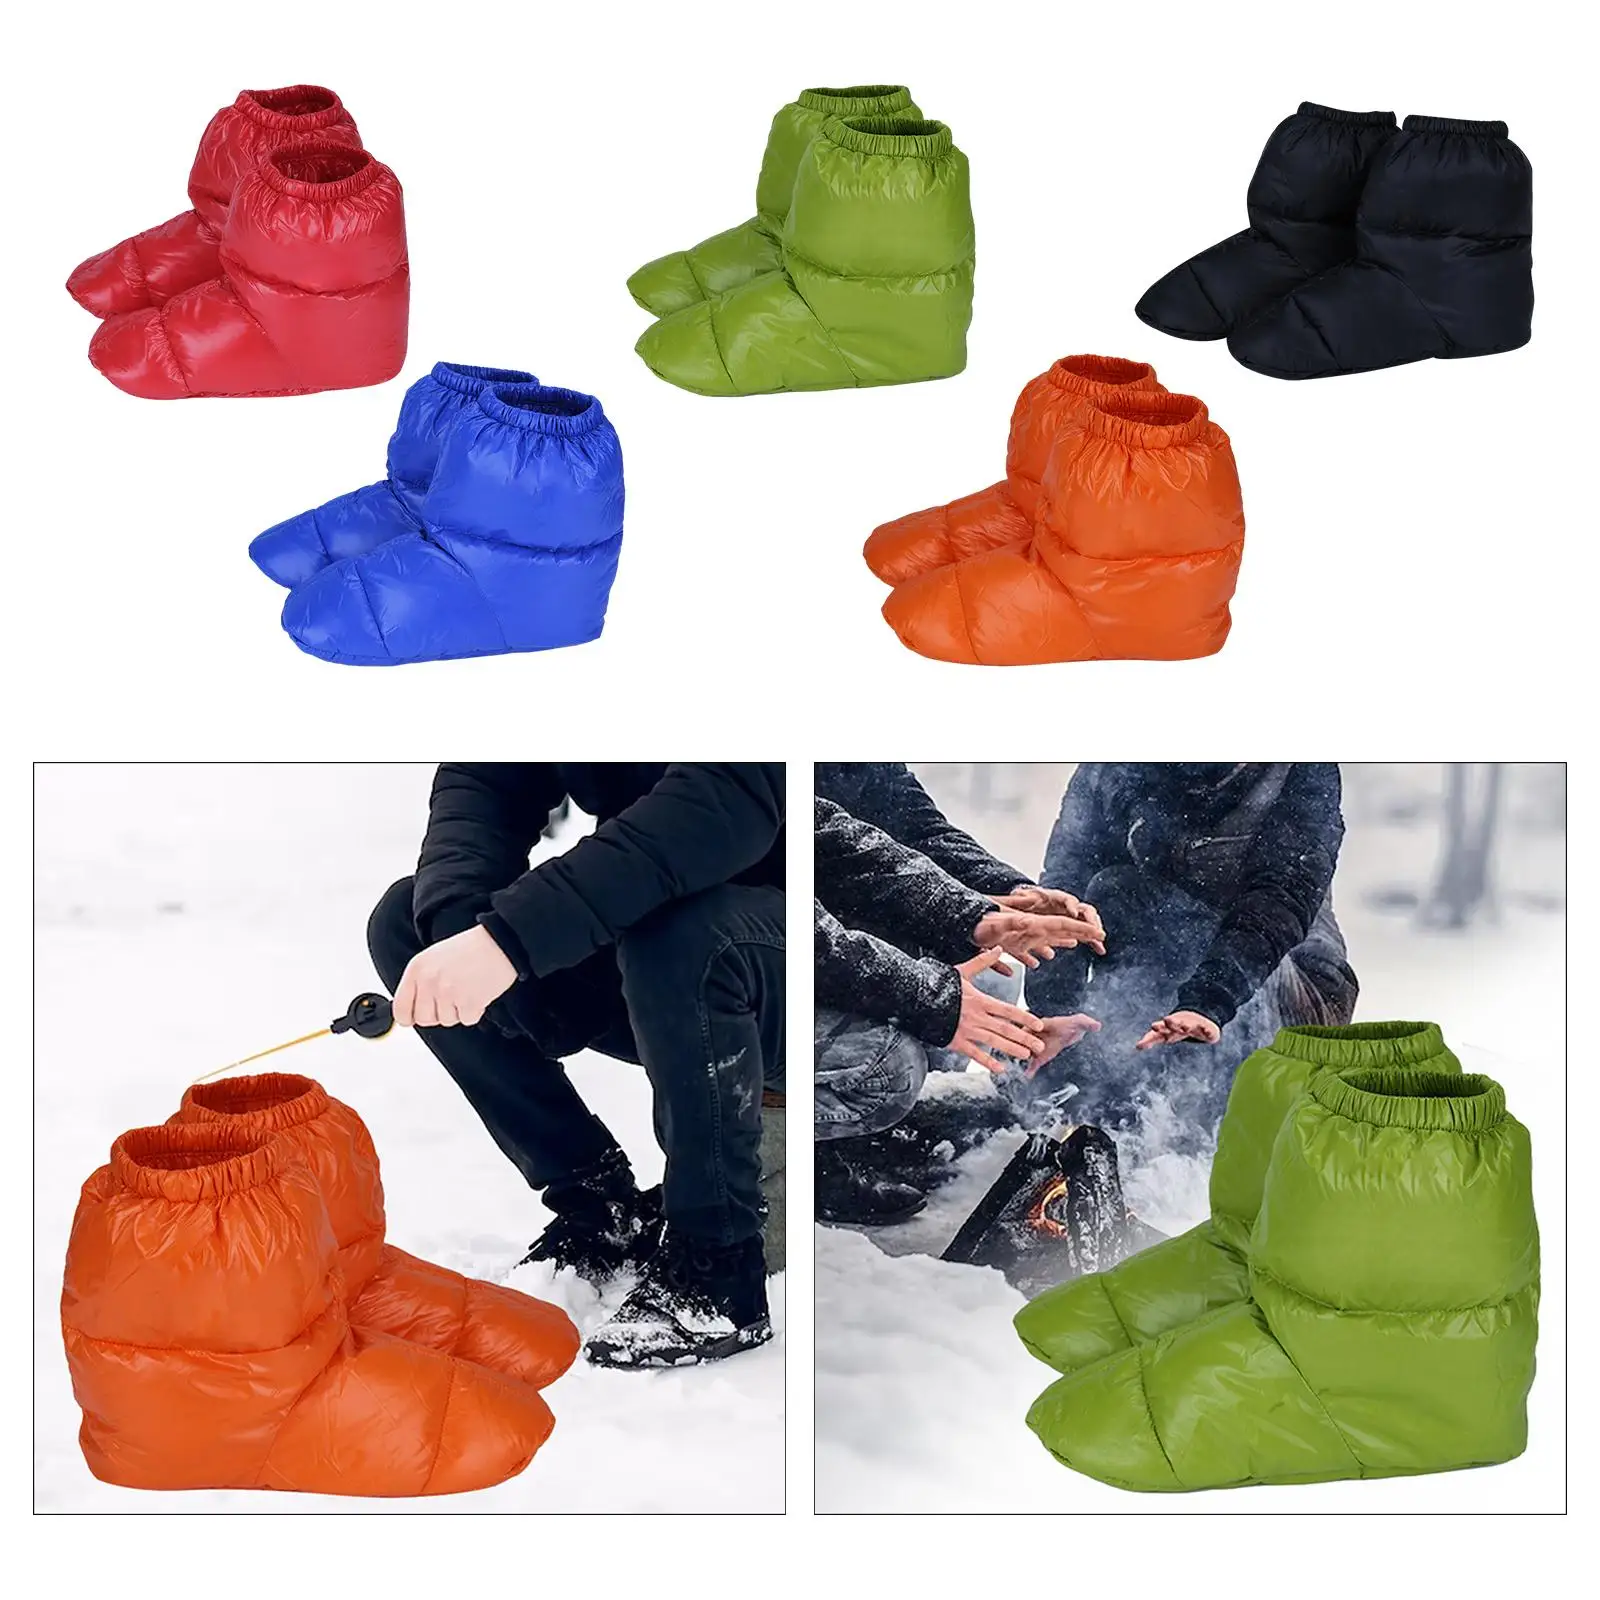 Winter Down Slippers Warm Bootie Shoes Cozy Women Men Keep Warm Soft Feet Cover Socks for Skiing Hiking Outdoor Fishing Indoor